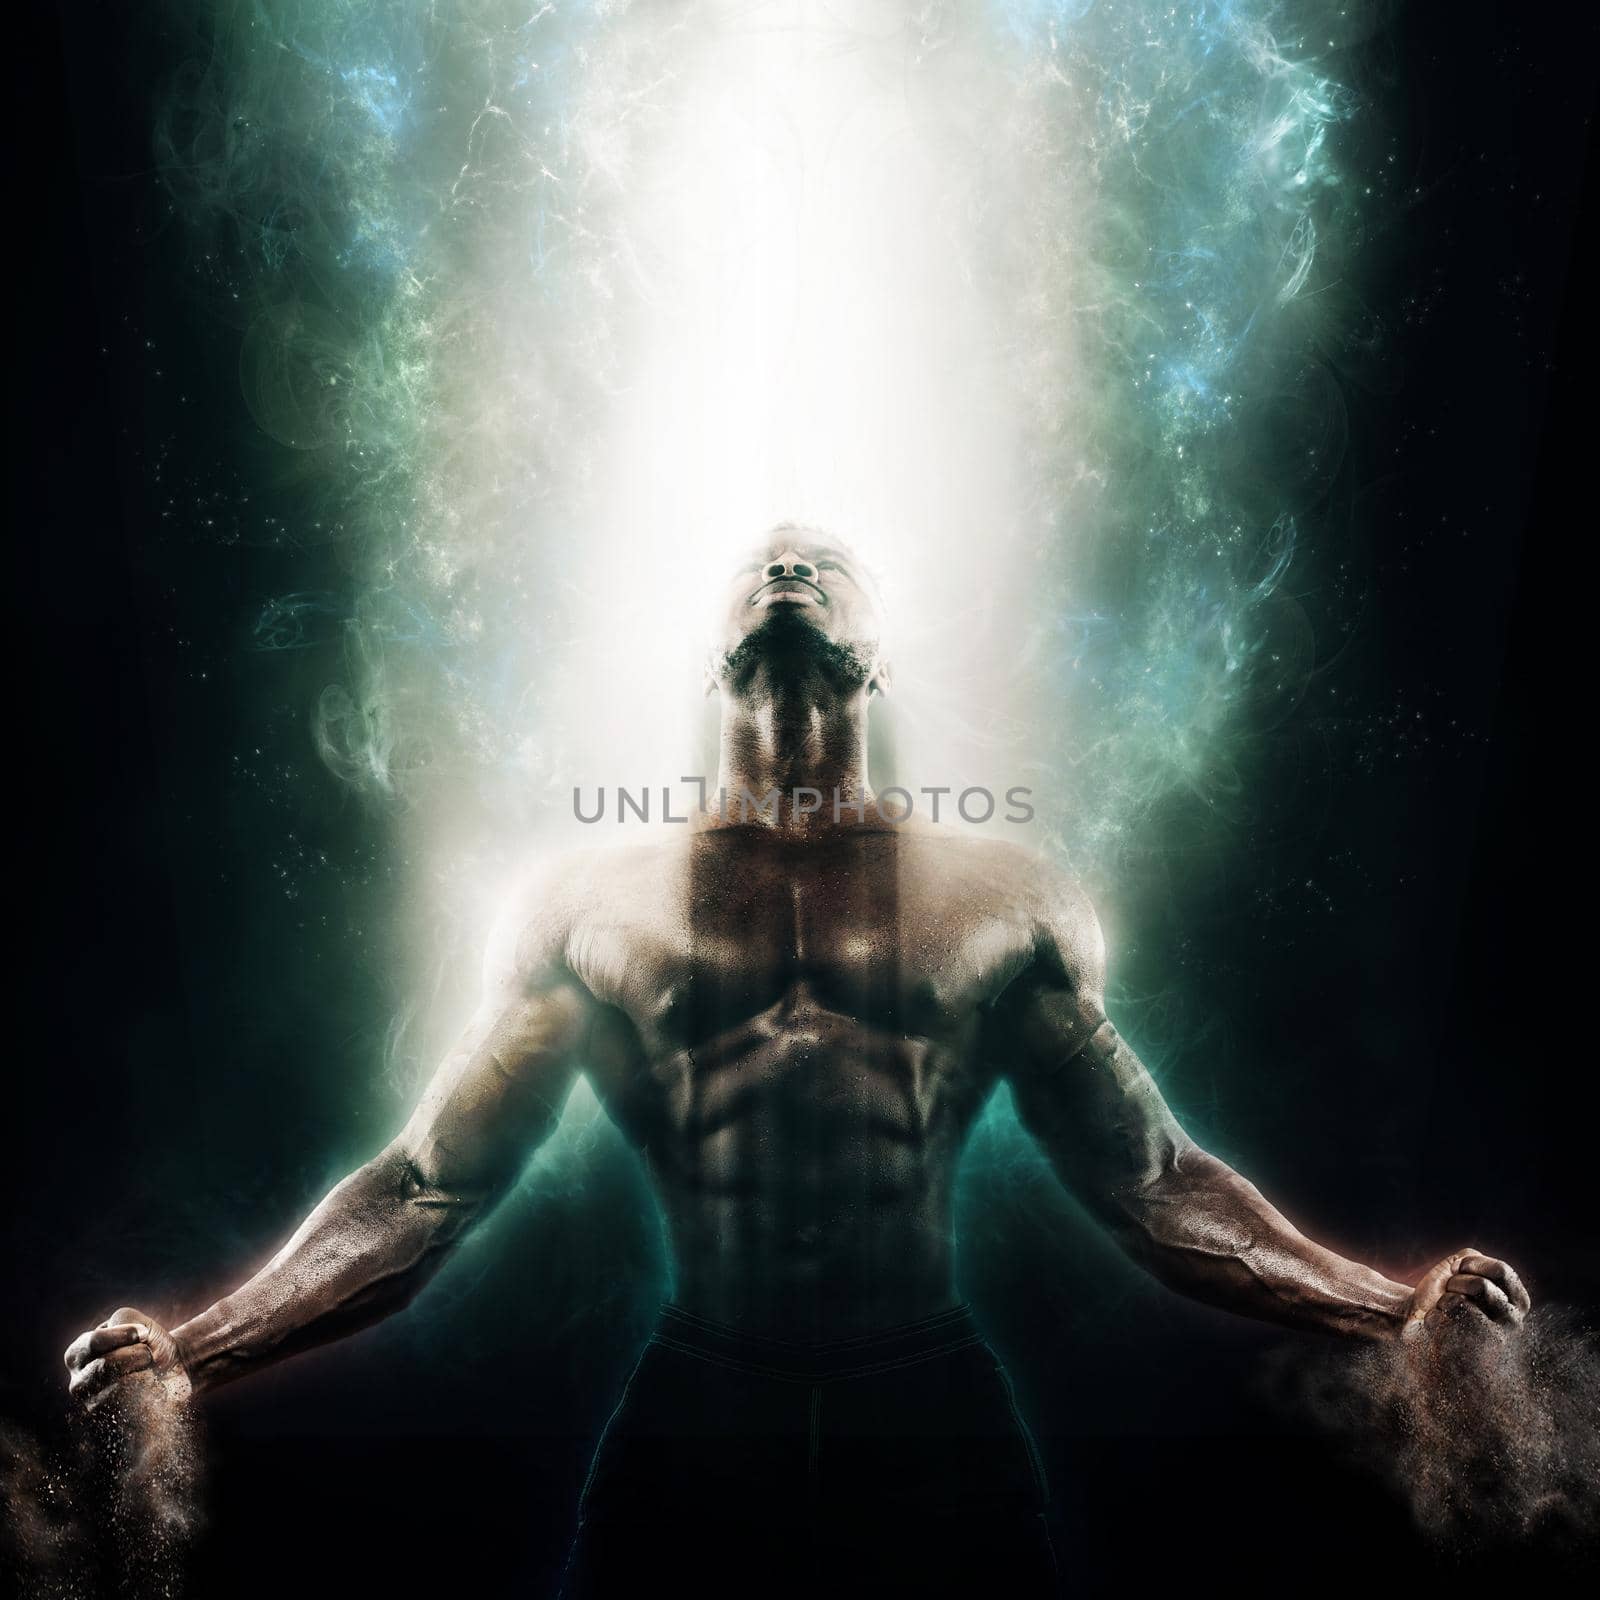 Sports wallpaper on dark background. Power athletic guy bodybuilder. Fire, smoke and energy.